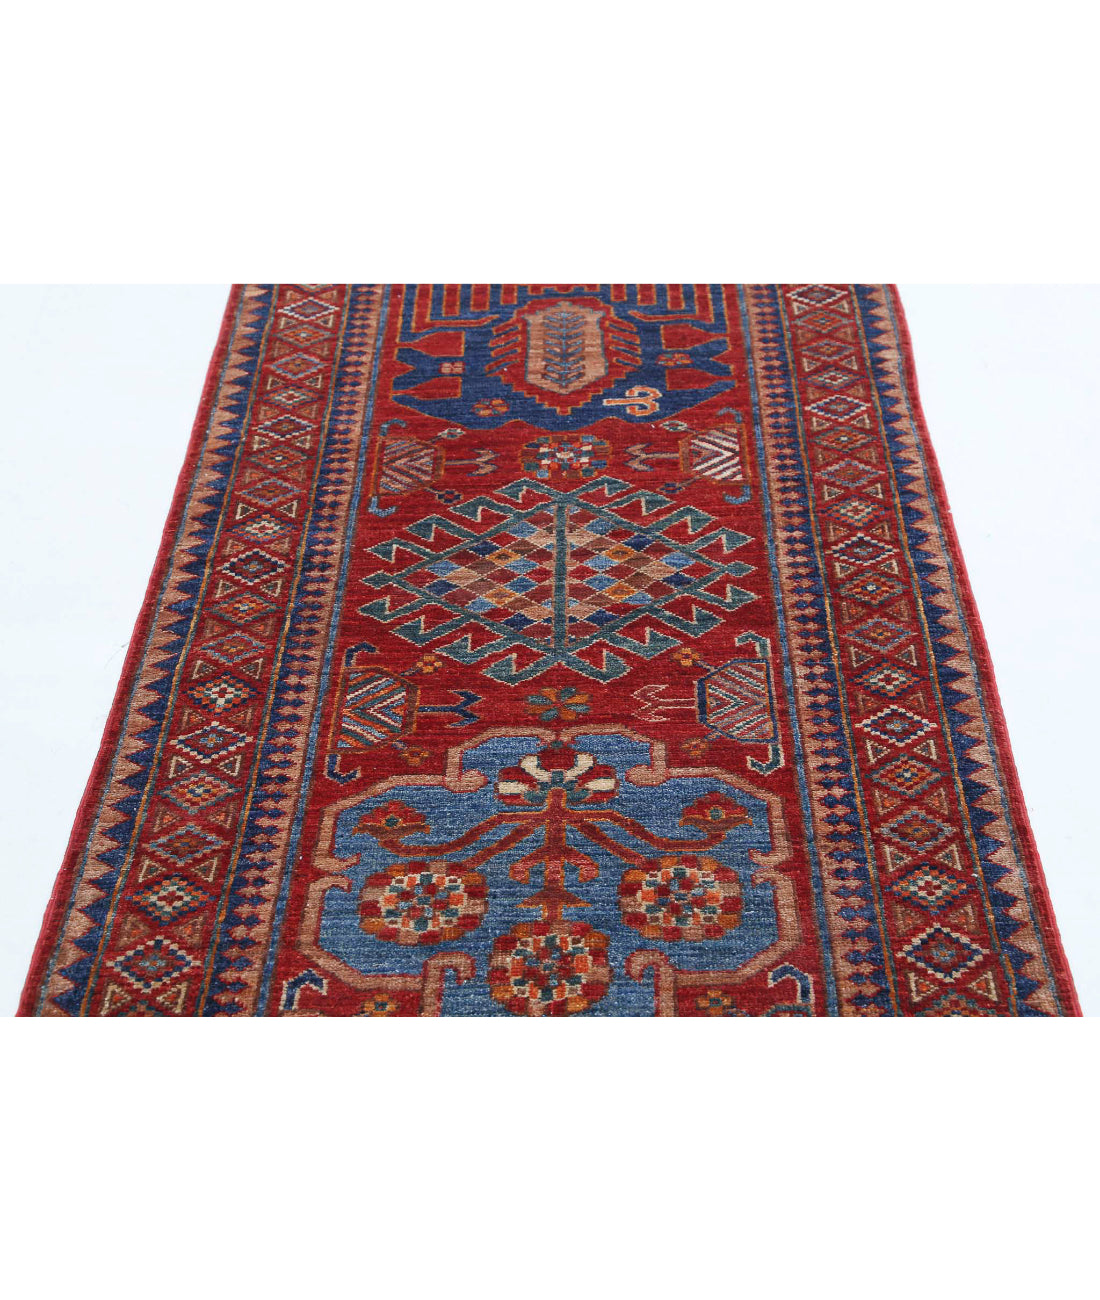 Hand Knotted Nomadic Caucasian Humna Wool Rug - 2'11'' x 5'9'' 2'11'' x 5'9'' (88 X 173) / Red / Taupe